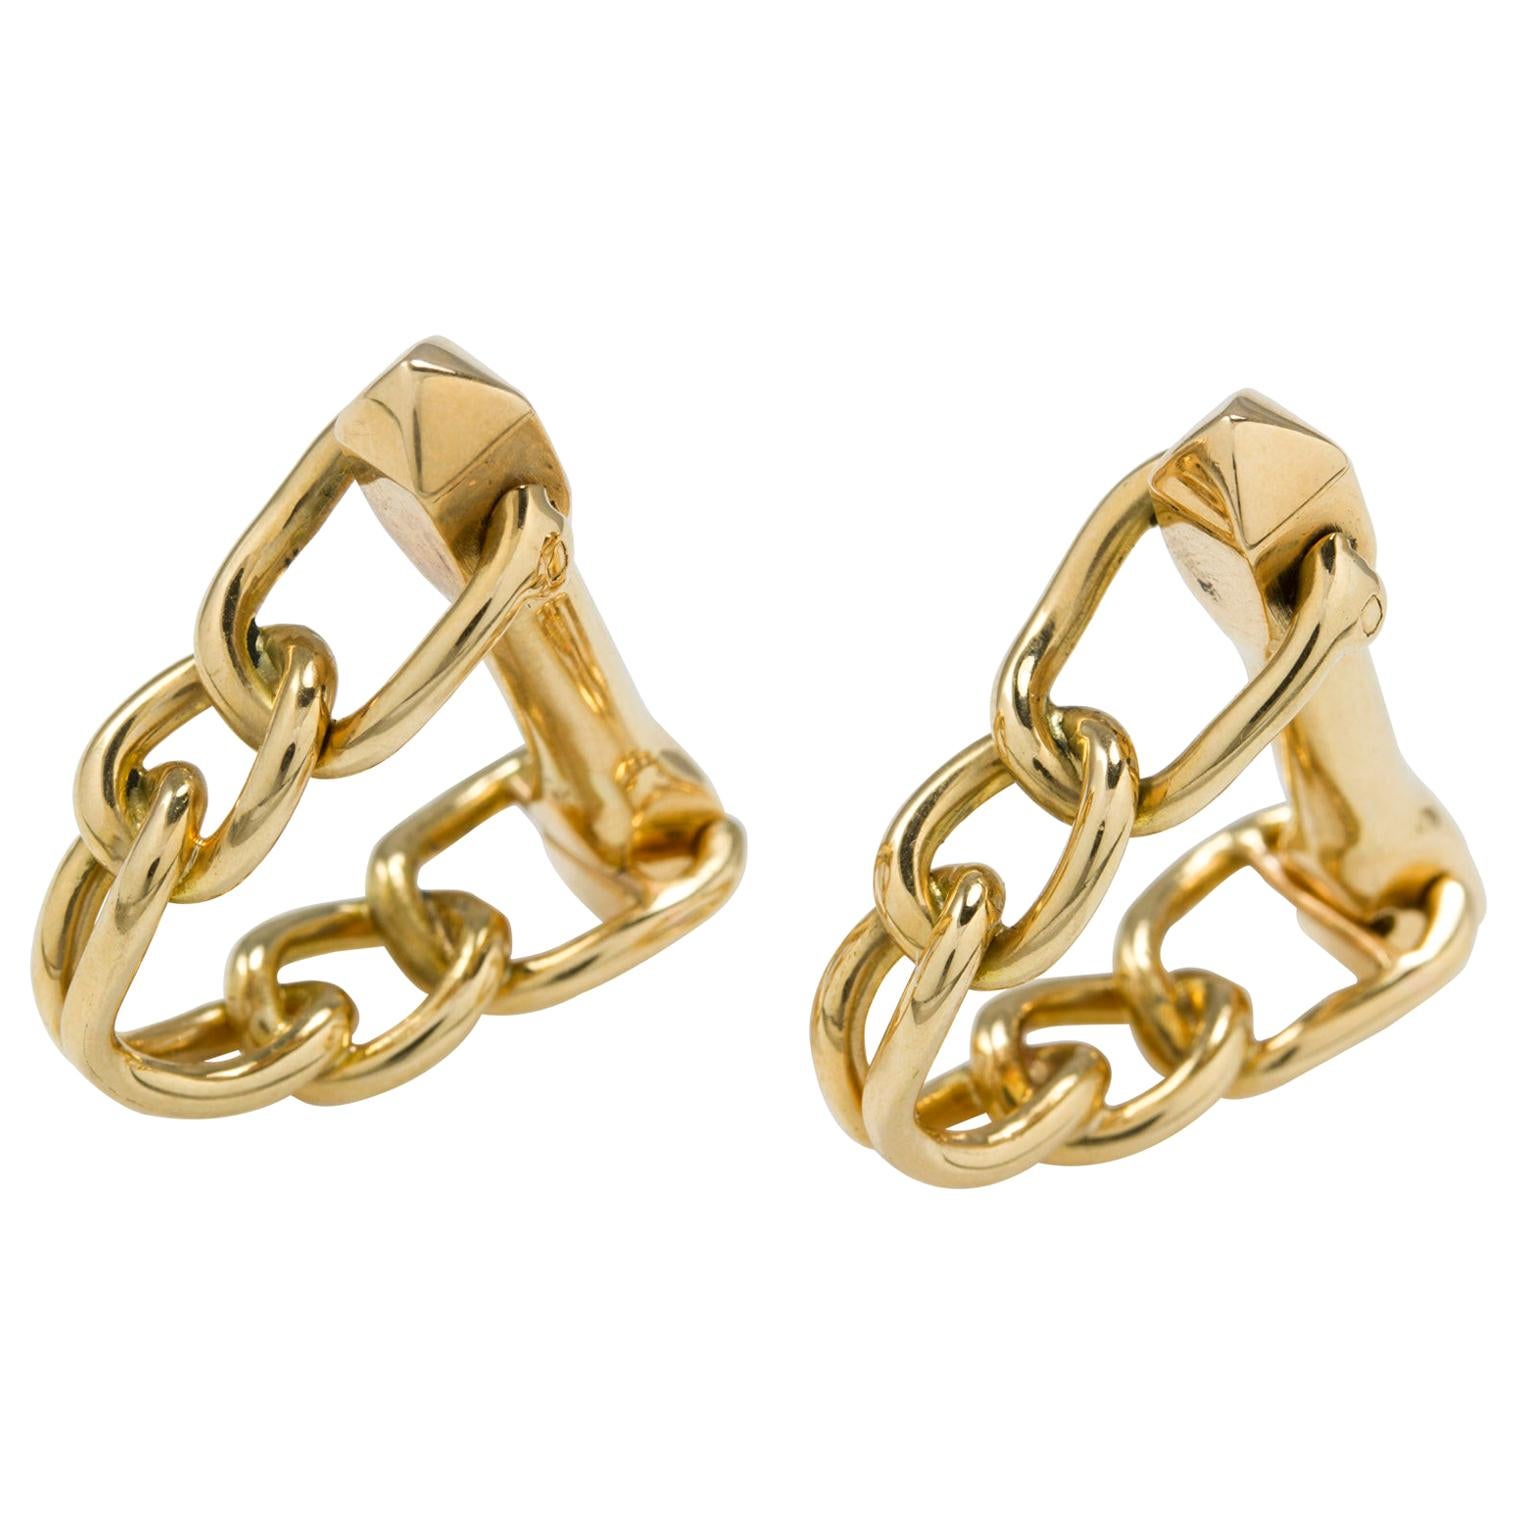 Pair of French Gold Cufflinks